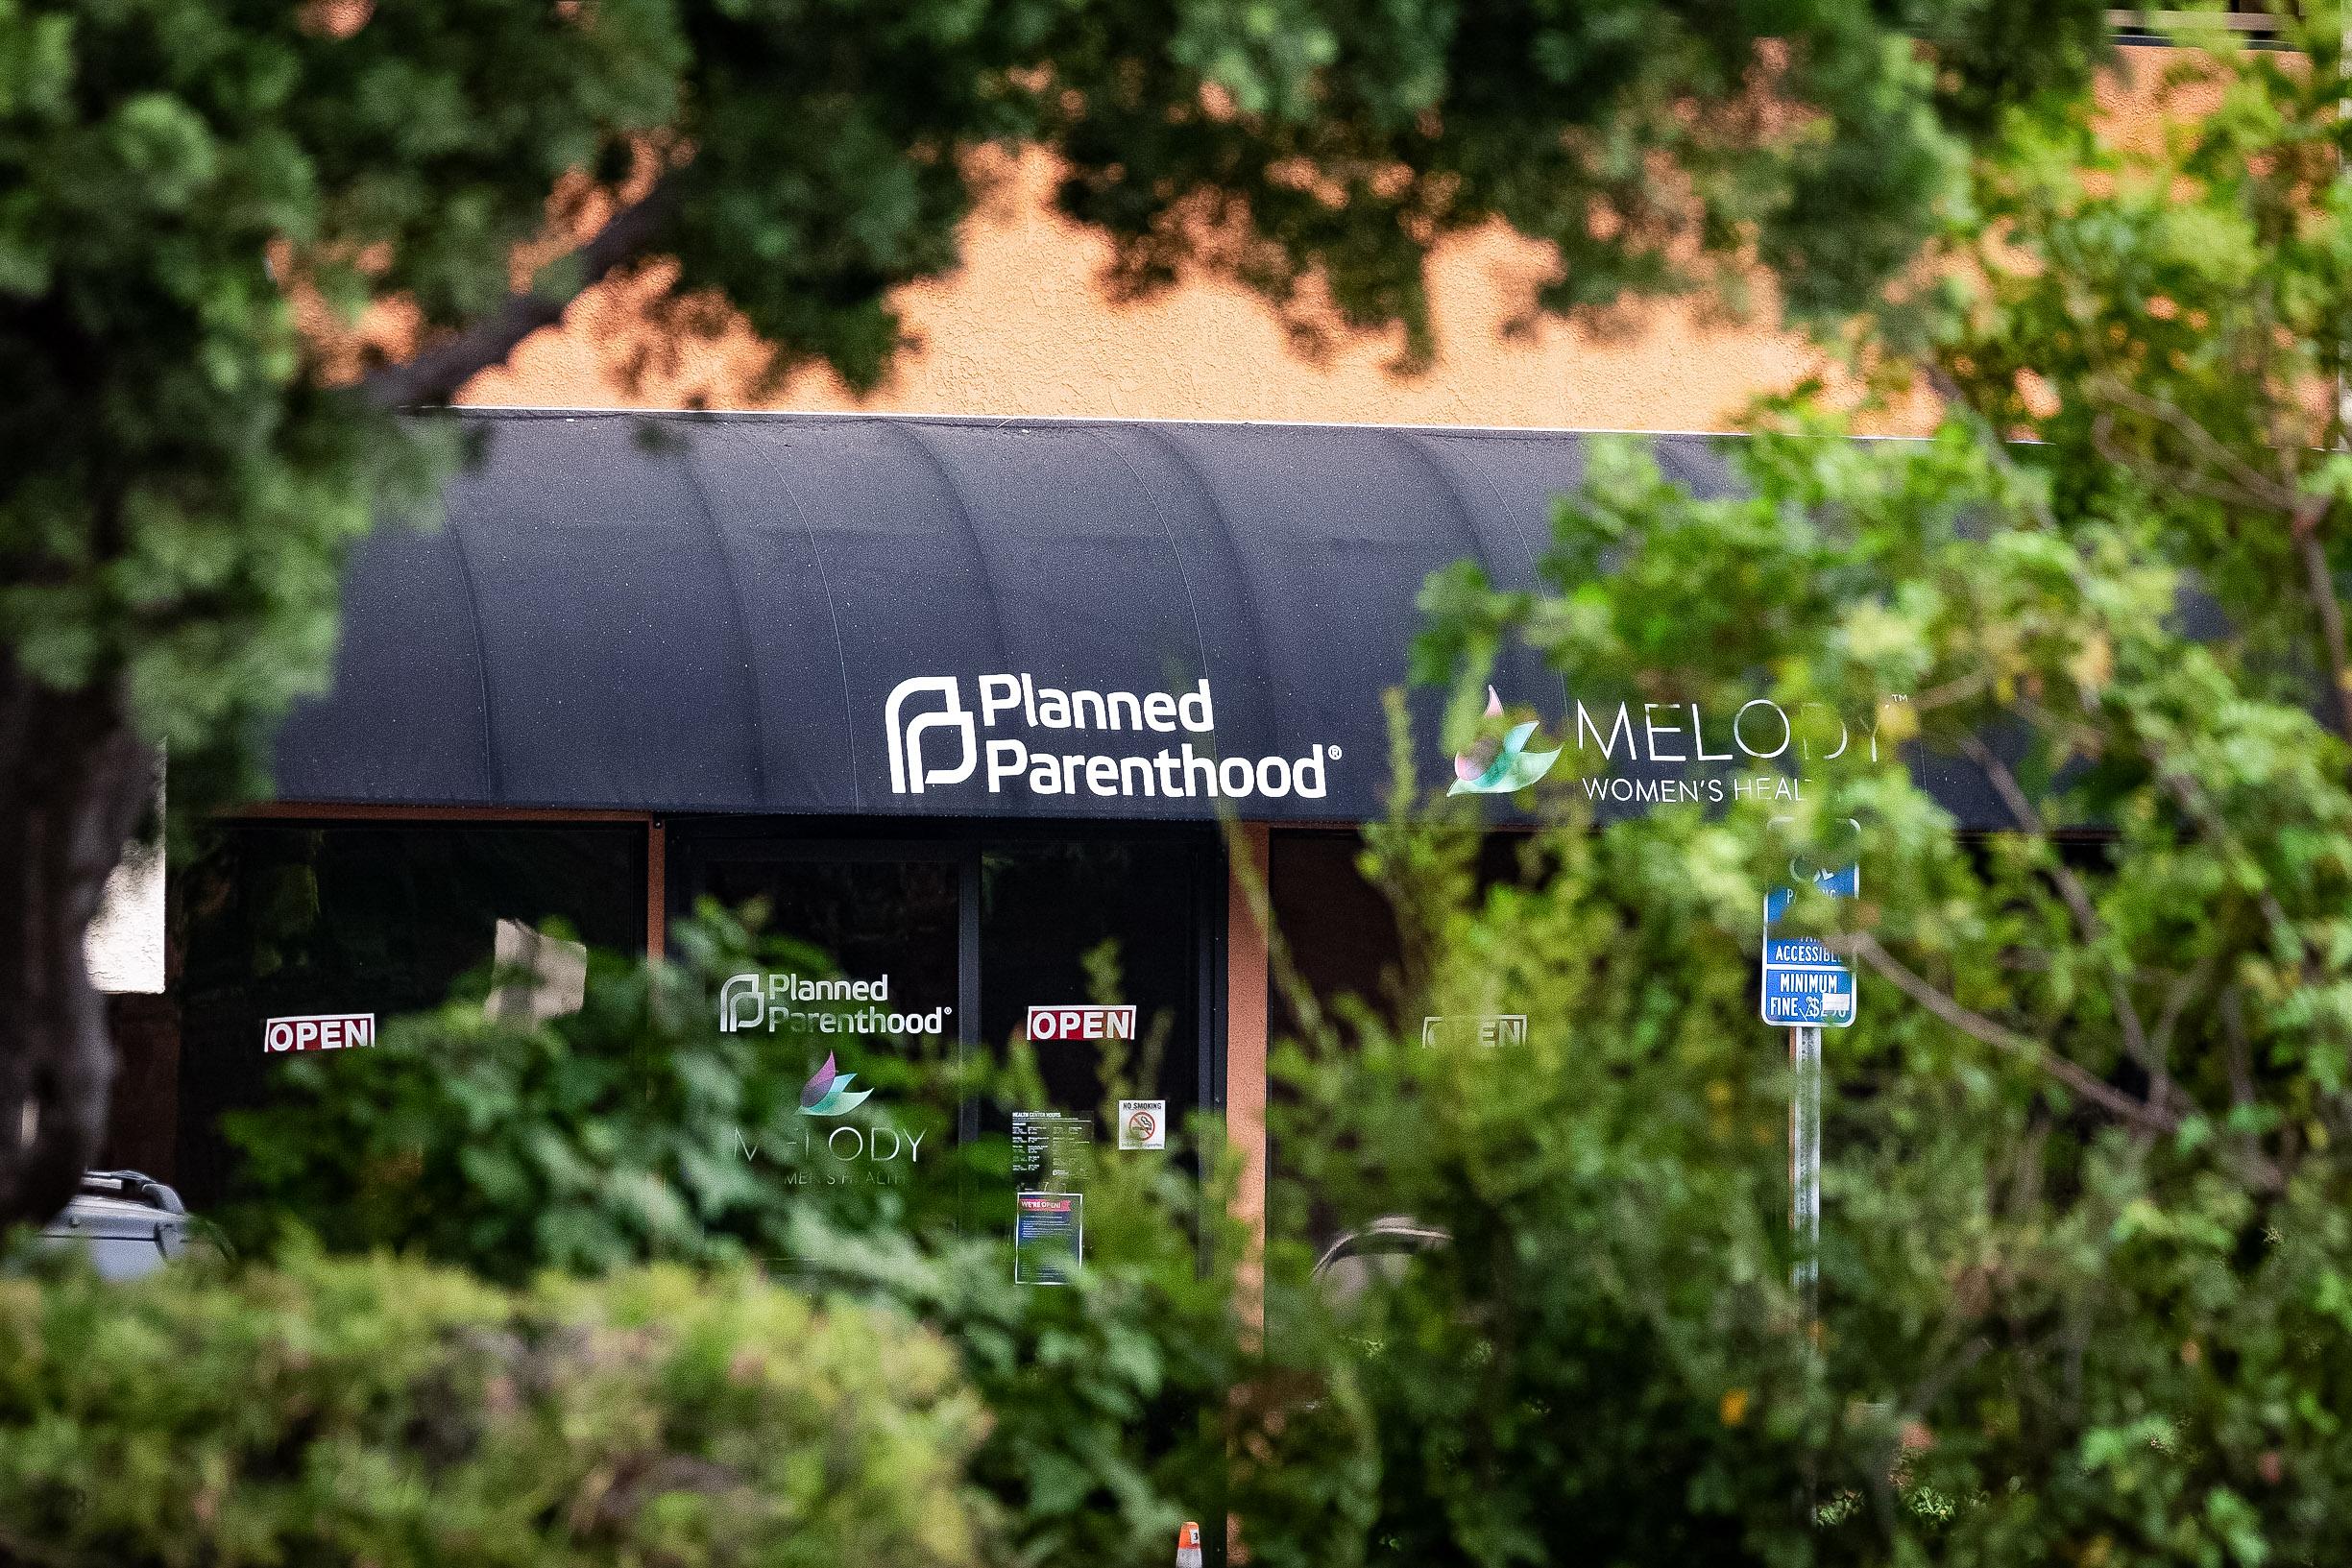 Florida Man Gets 3 1/2 Years For Planned Parenthood Firebombing